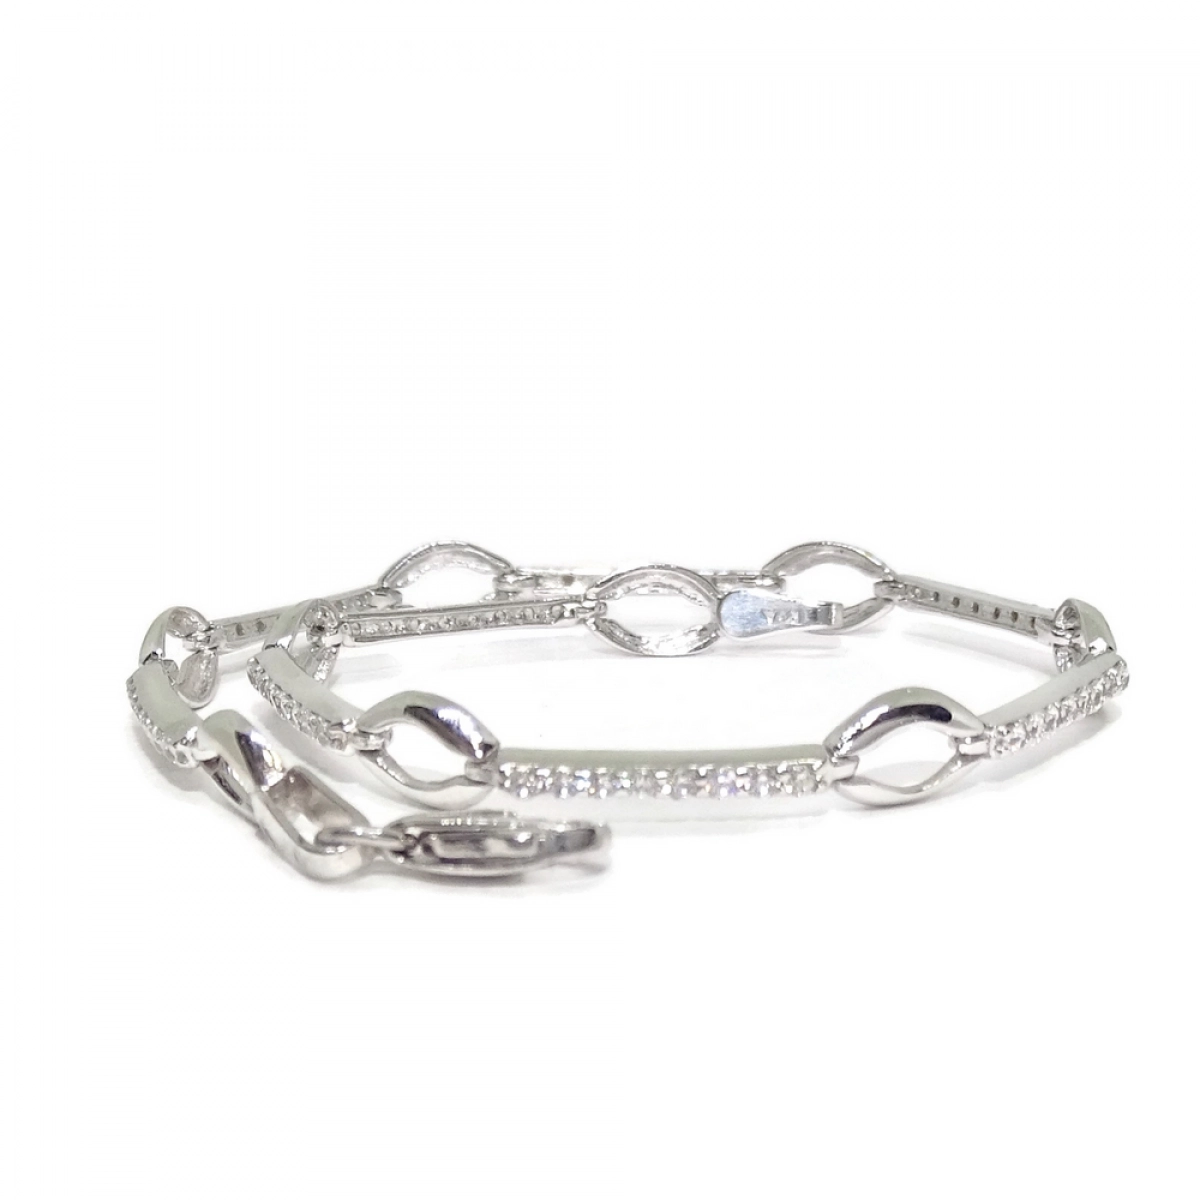 BRACELET IN 18K WHITE GOLD FOR WOMEN WITH ZIRCONS OF THE HIGHEST QUALITY AND 9 �VALUE NEVER SAY NEVER